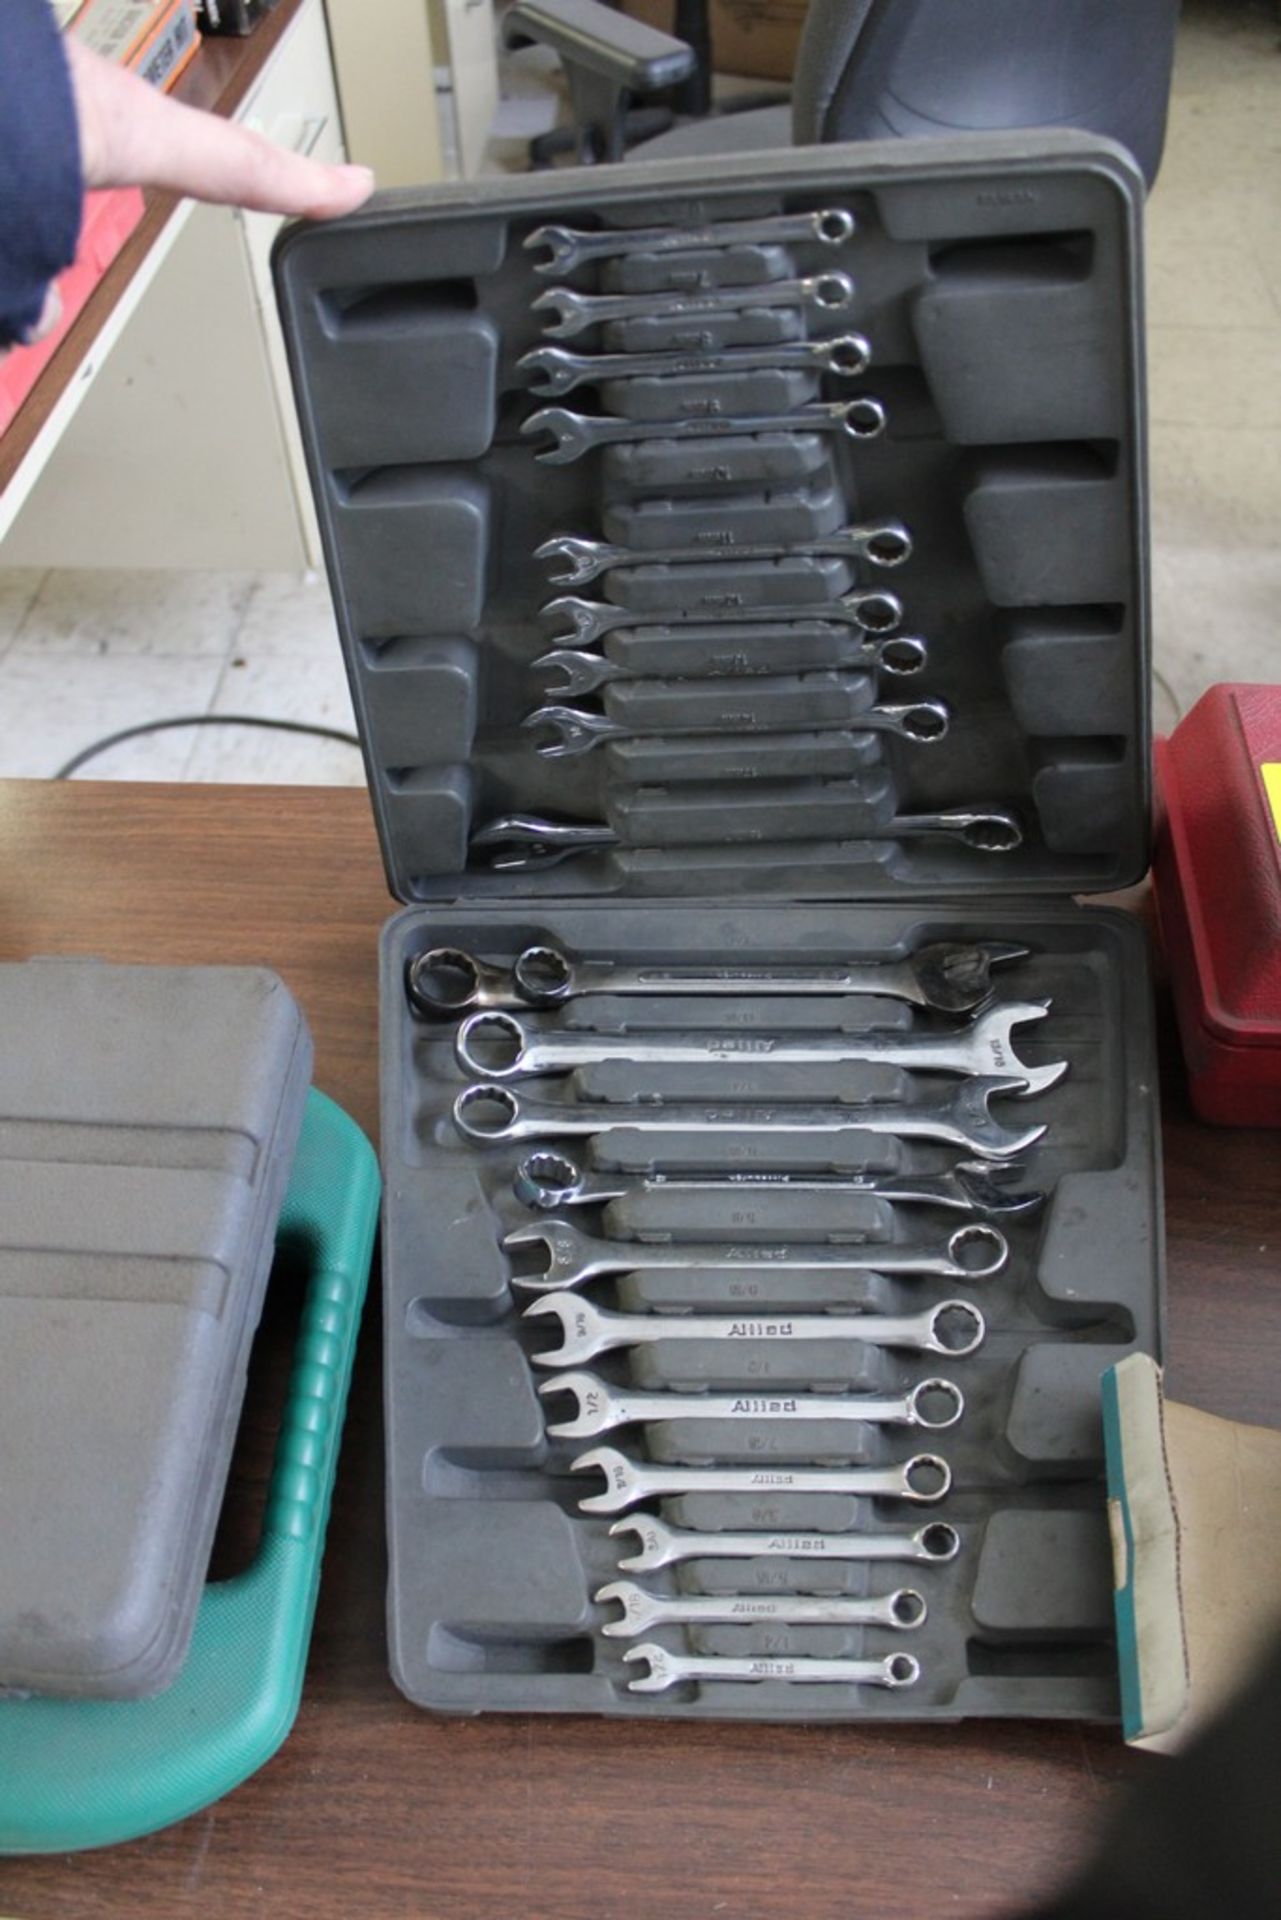 ALLIED 1/4" - 7/8", 6MM - 19MM BOX WRENCH SET